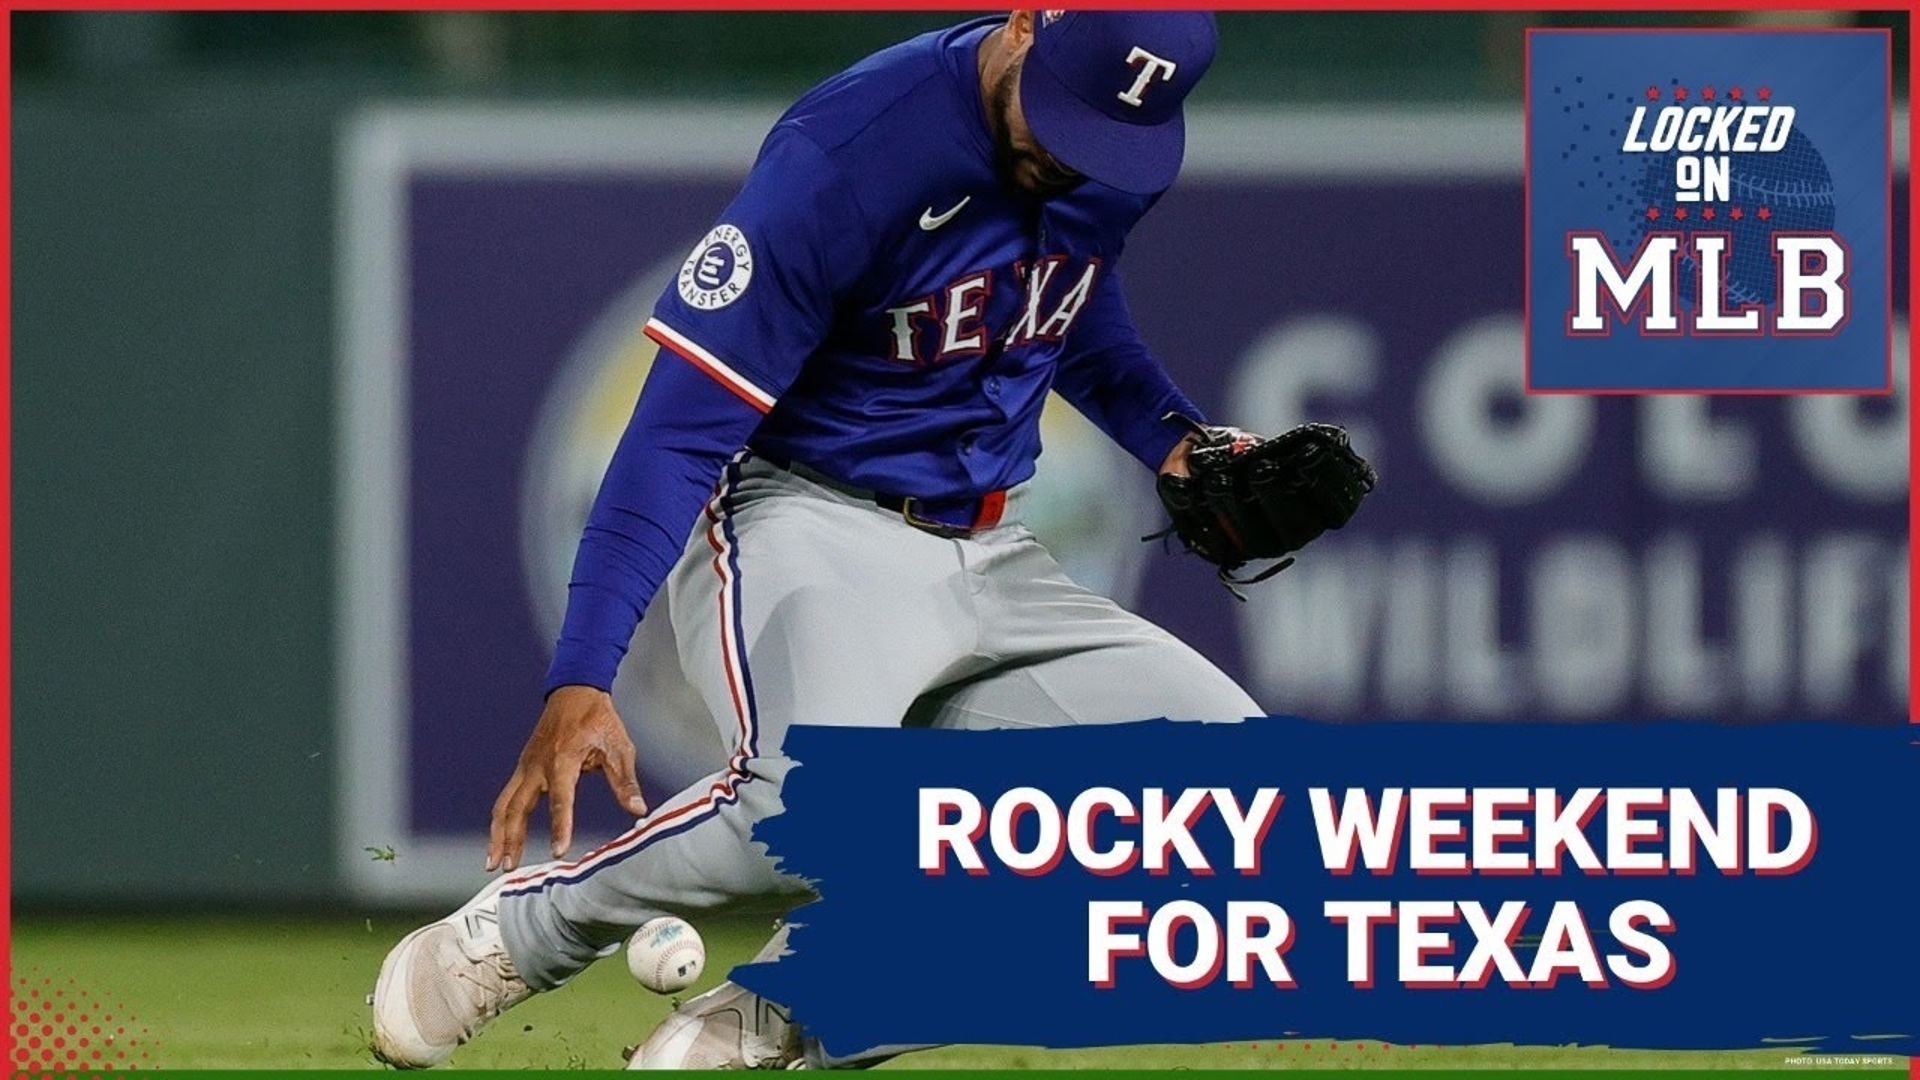 The Rangers got swept by the lowly Rockies. If the AL West ends up this year like it did in 2023, the champs might look back at this week in anger.